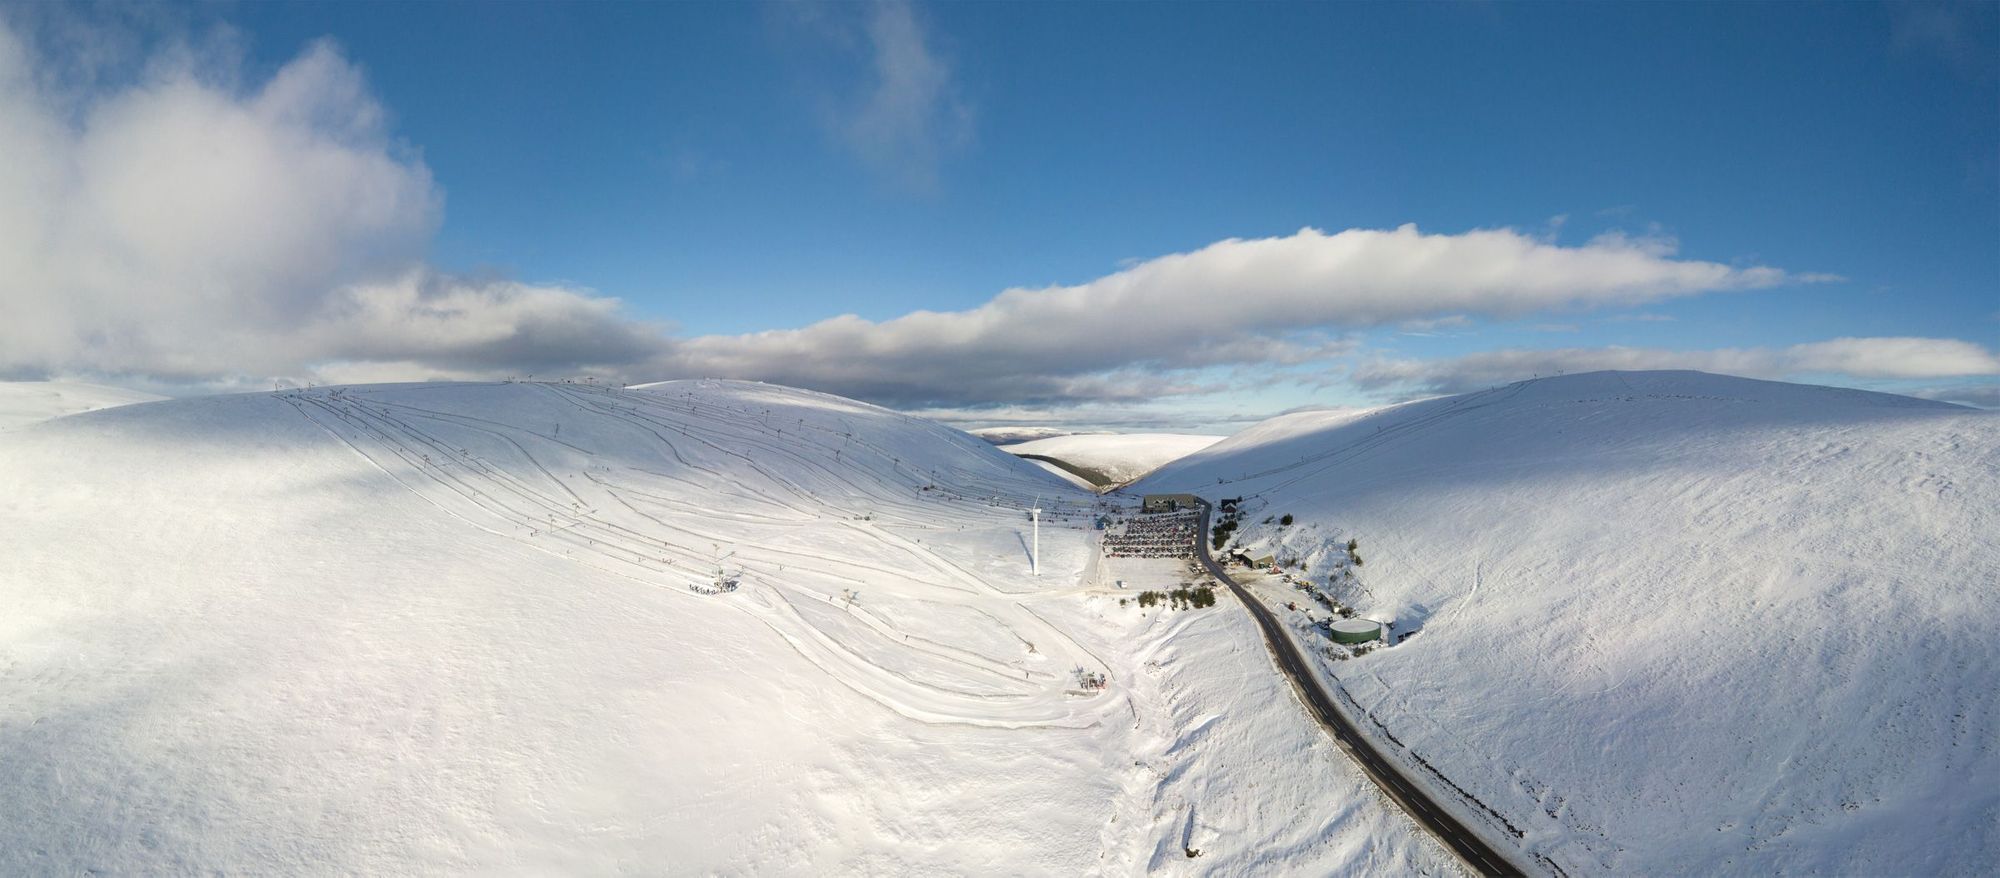 The Lecht 2090 ski resort is a fantastic option for families and beginners. Photo: Snowsport Scotland